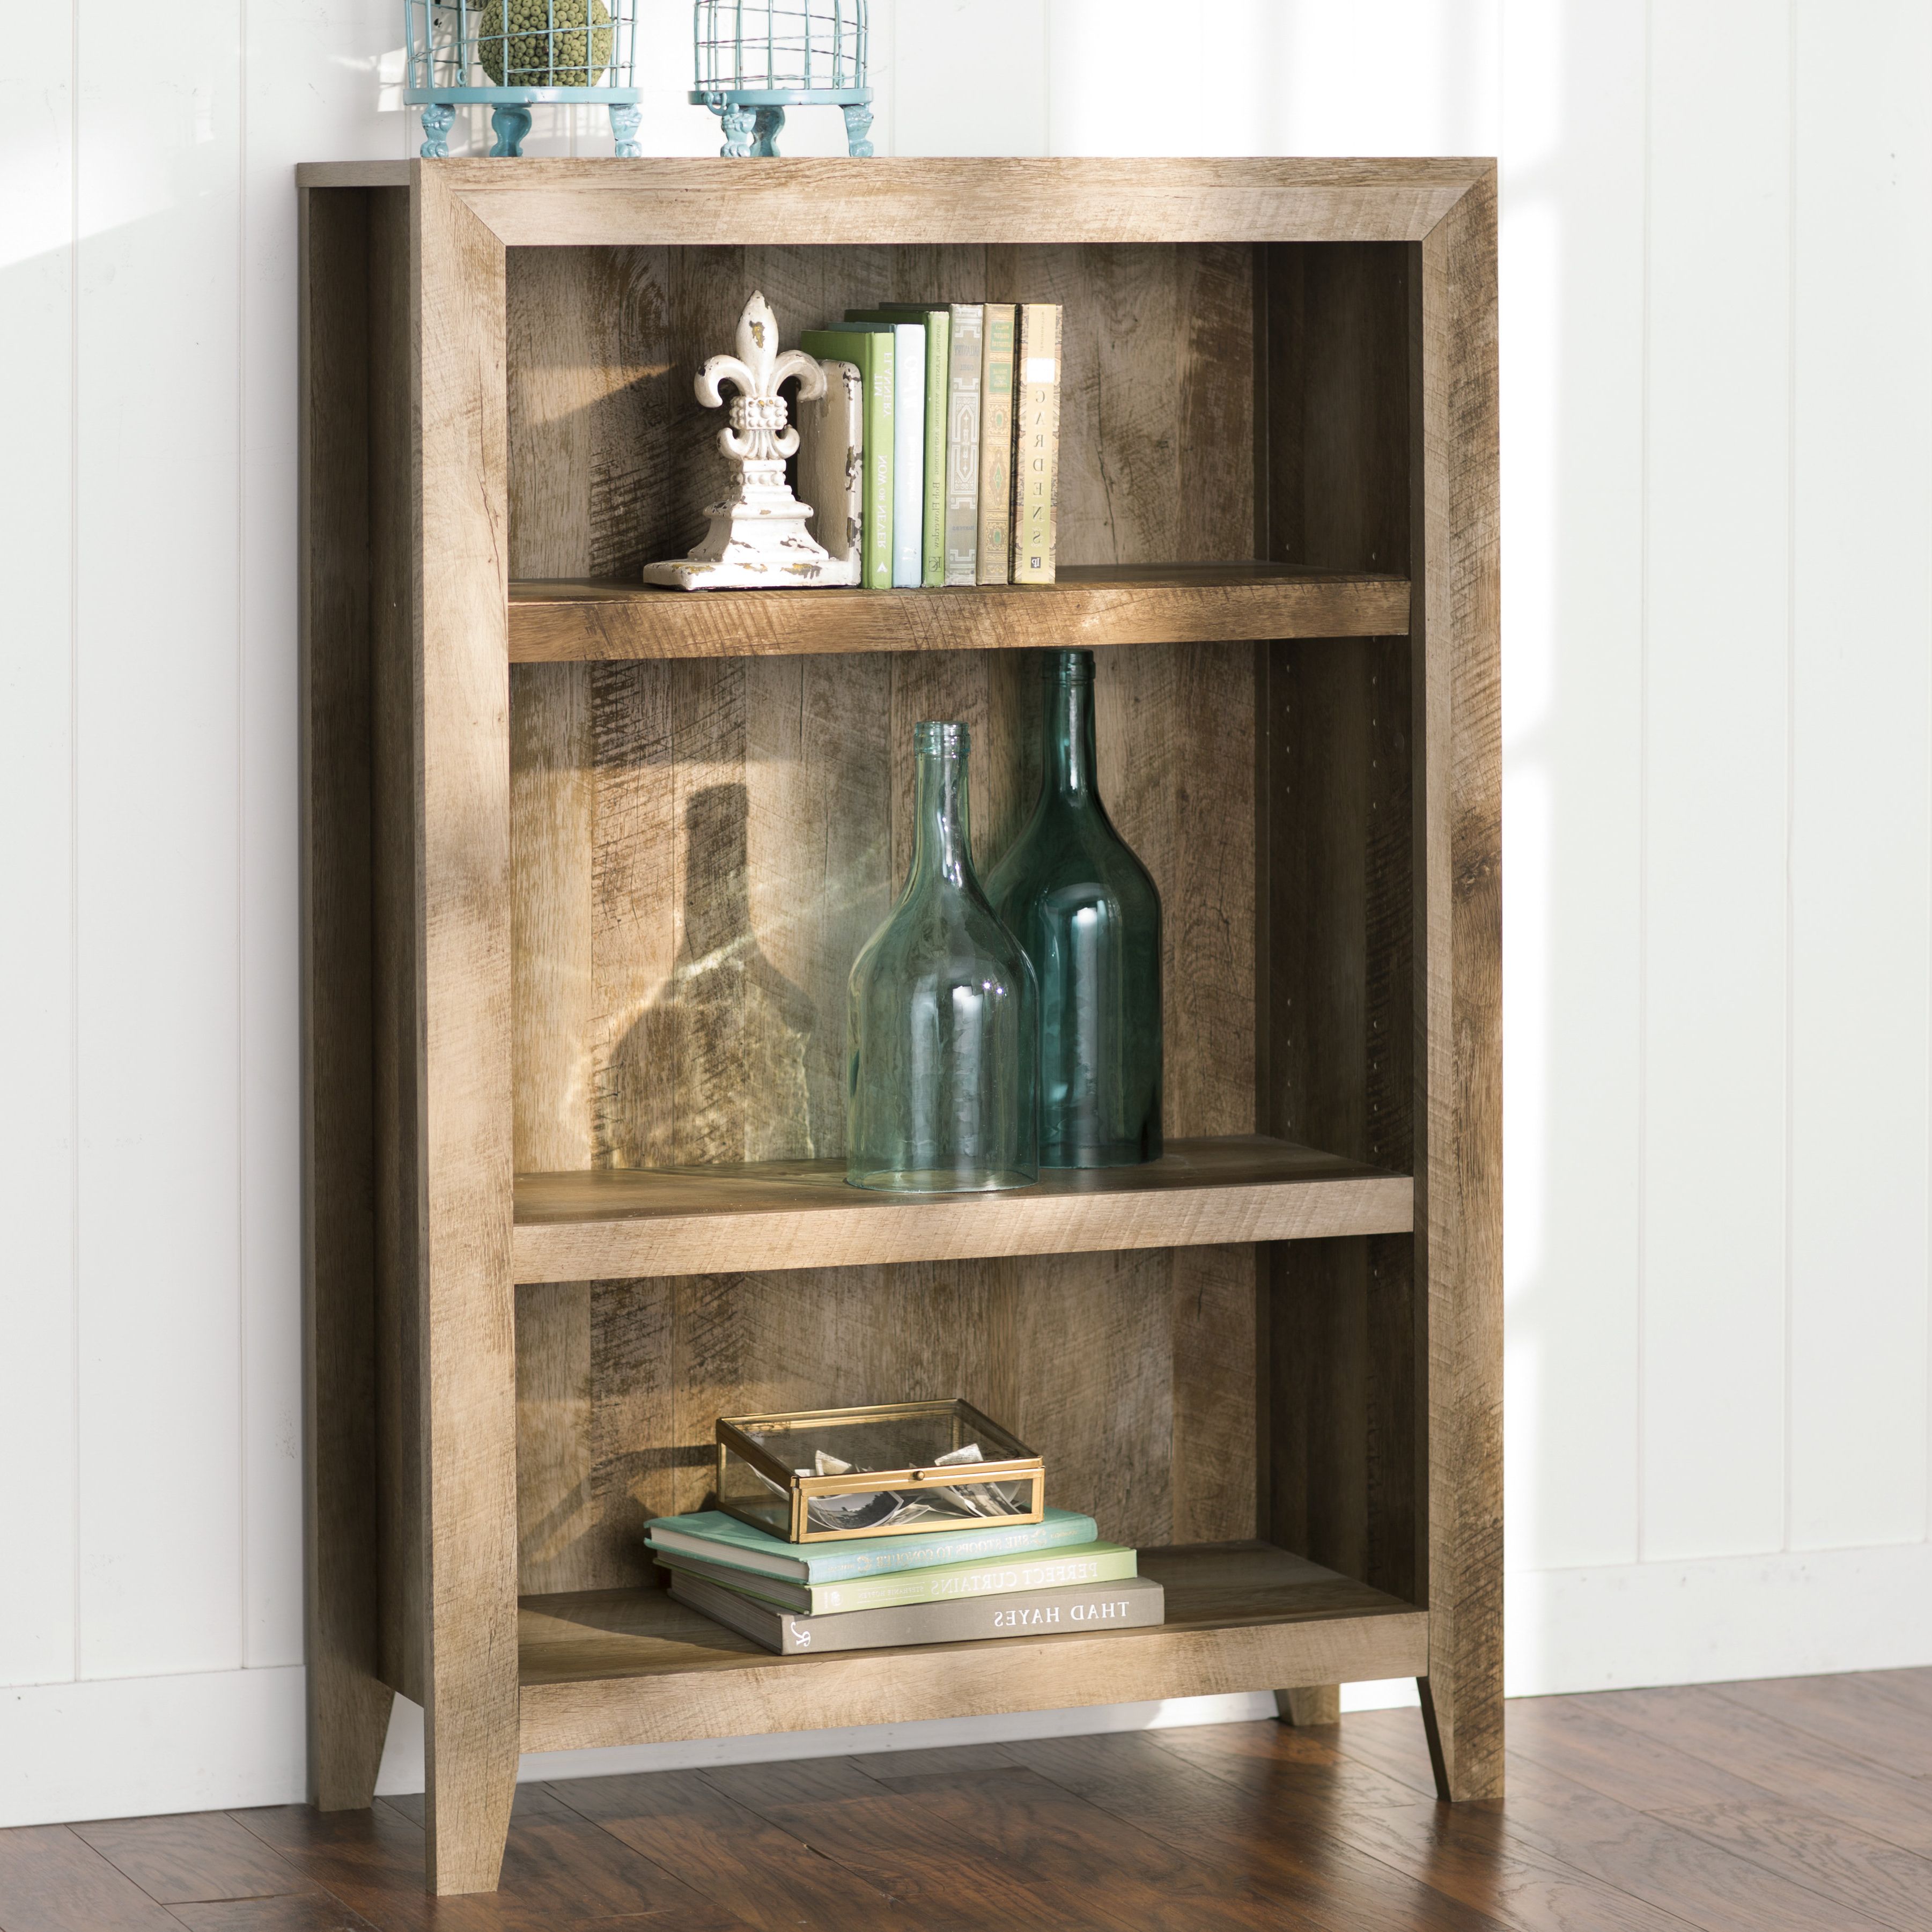 Orford Standard Bookcase For Famous Orford Standard Bookcases (View 4 of 20)